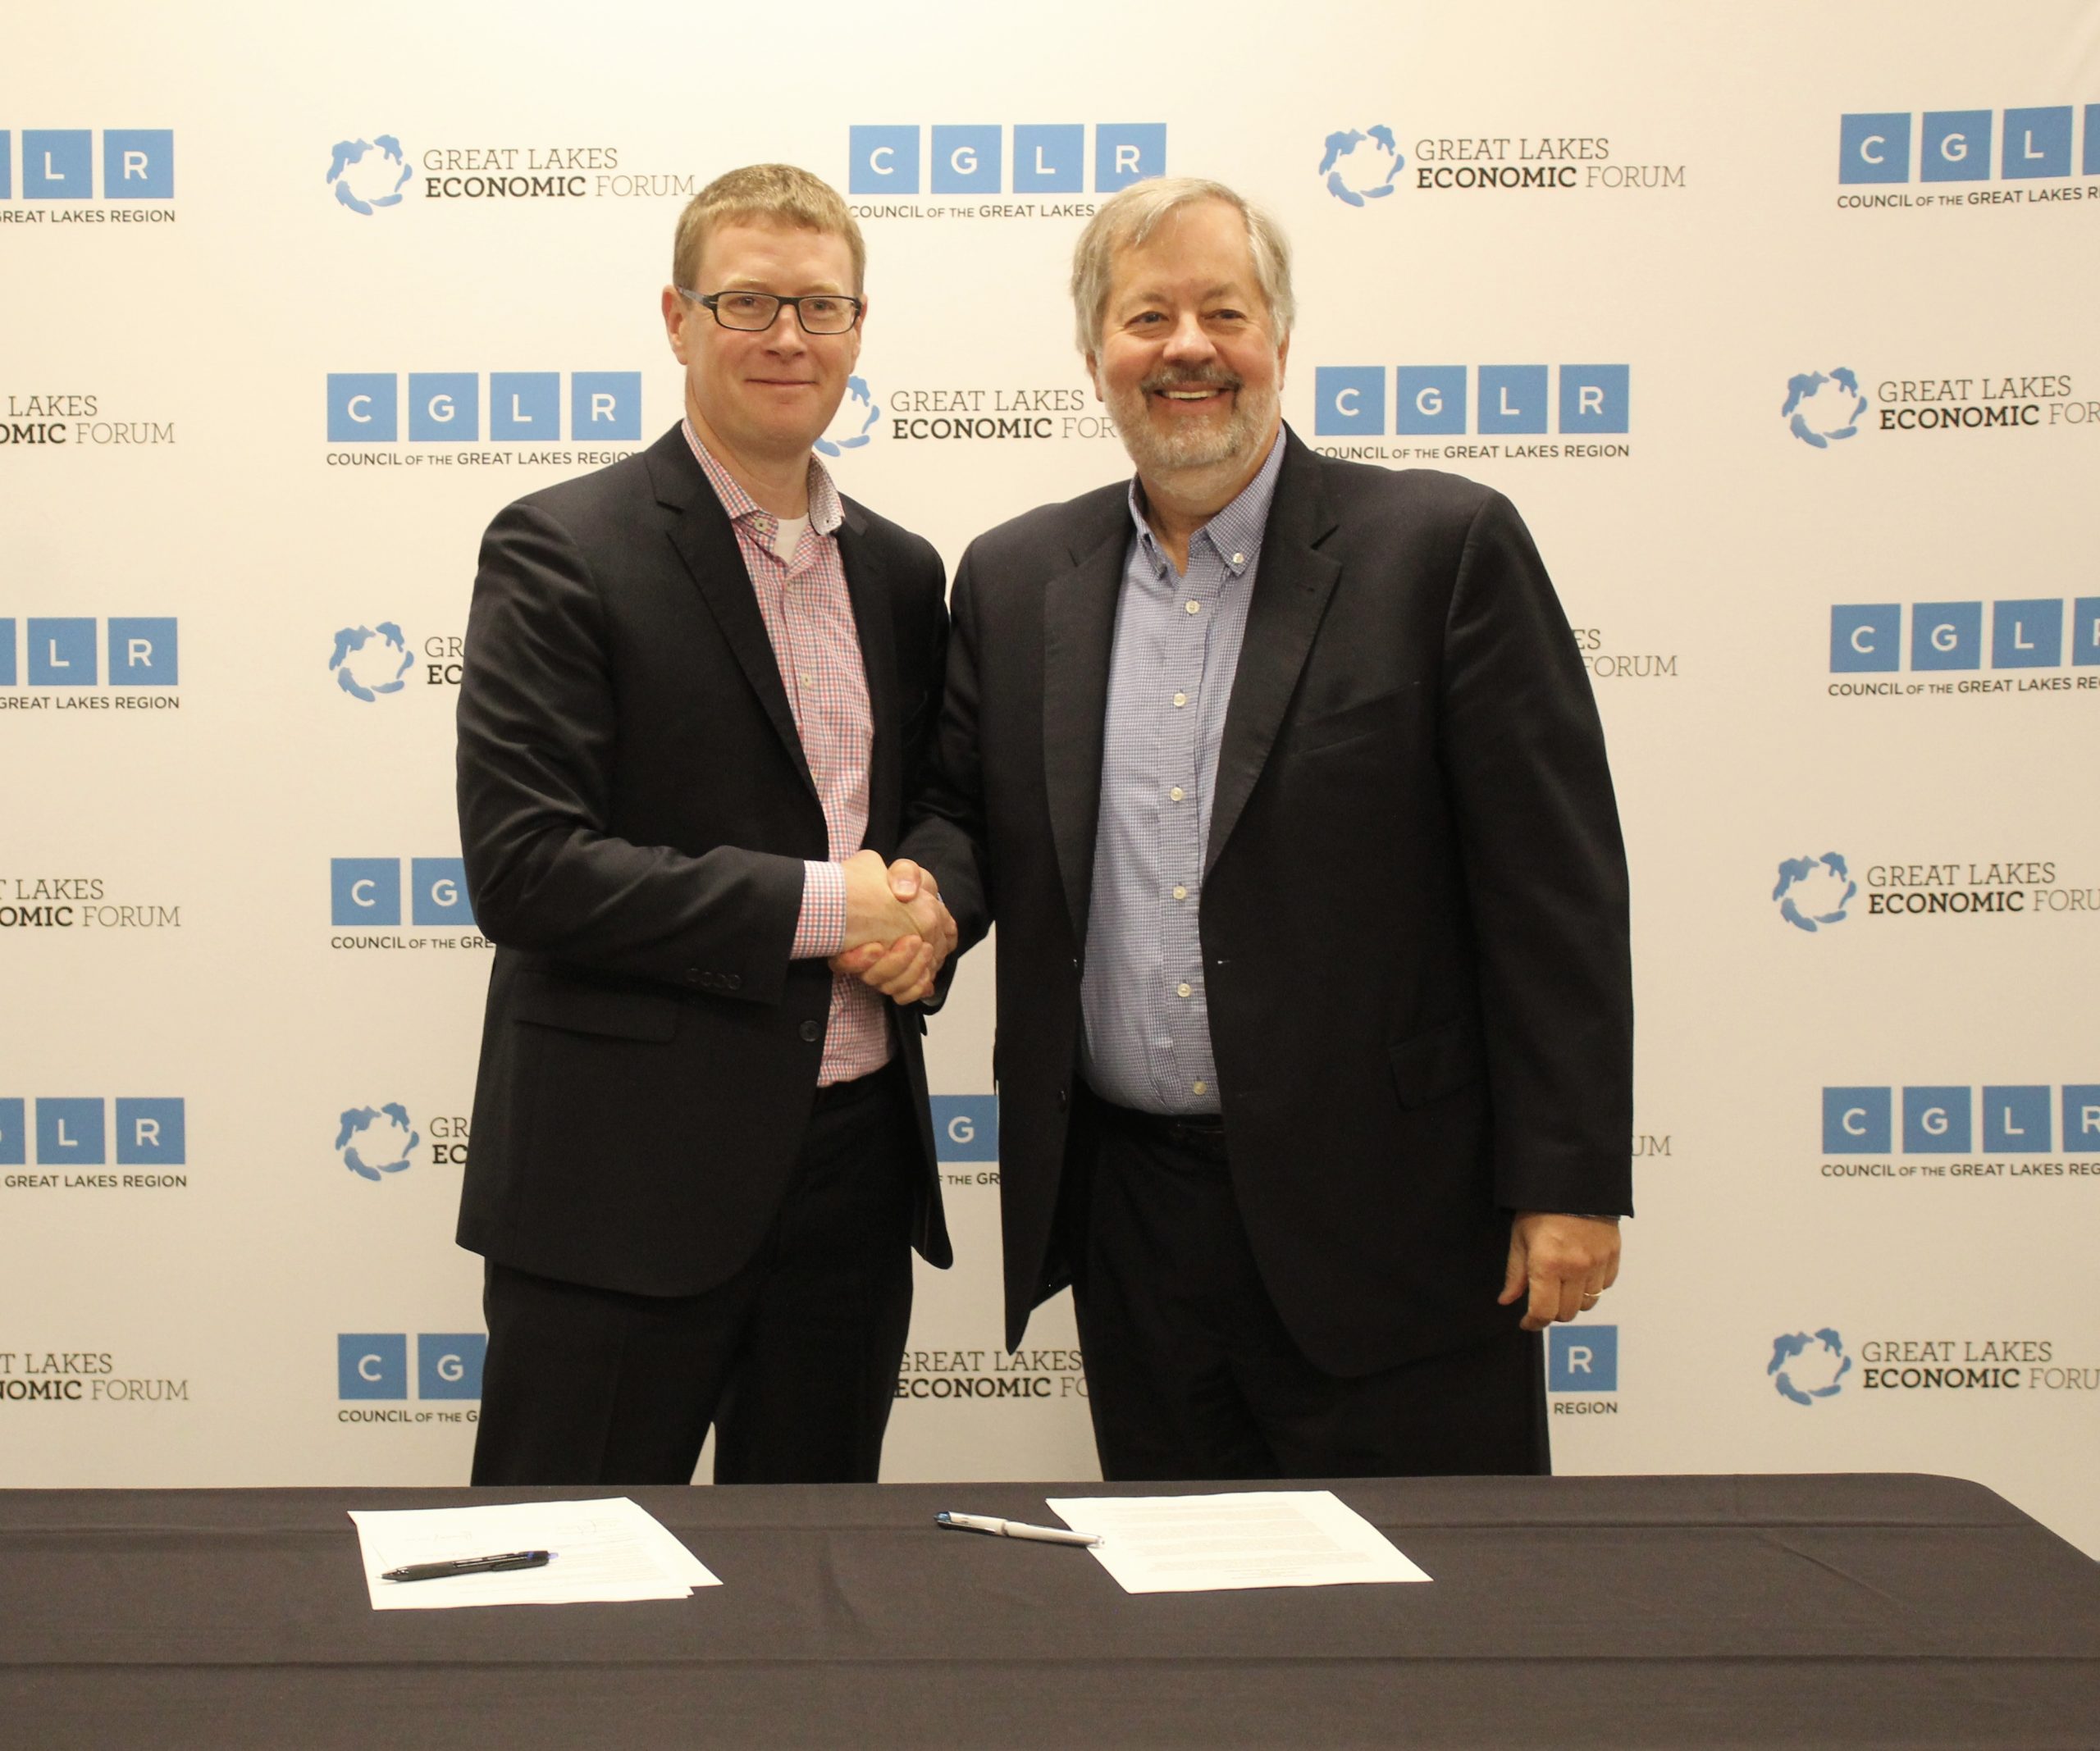 Council of the Great Lakes Region and The Water Council Partner to Accelerate Water Innovation and Stewardship